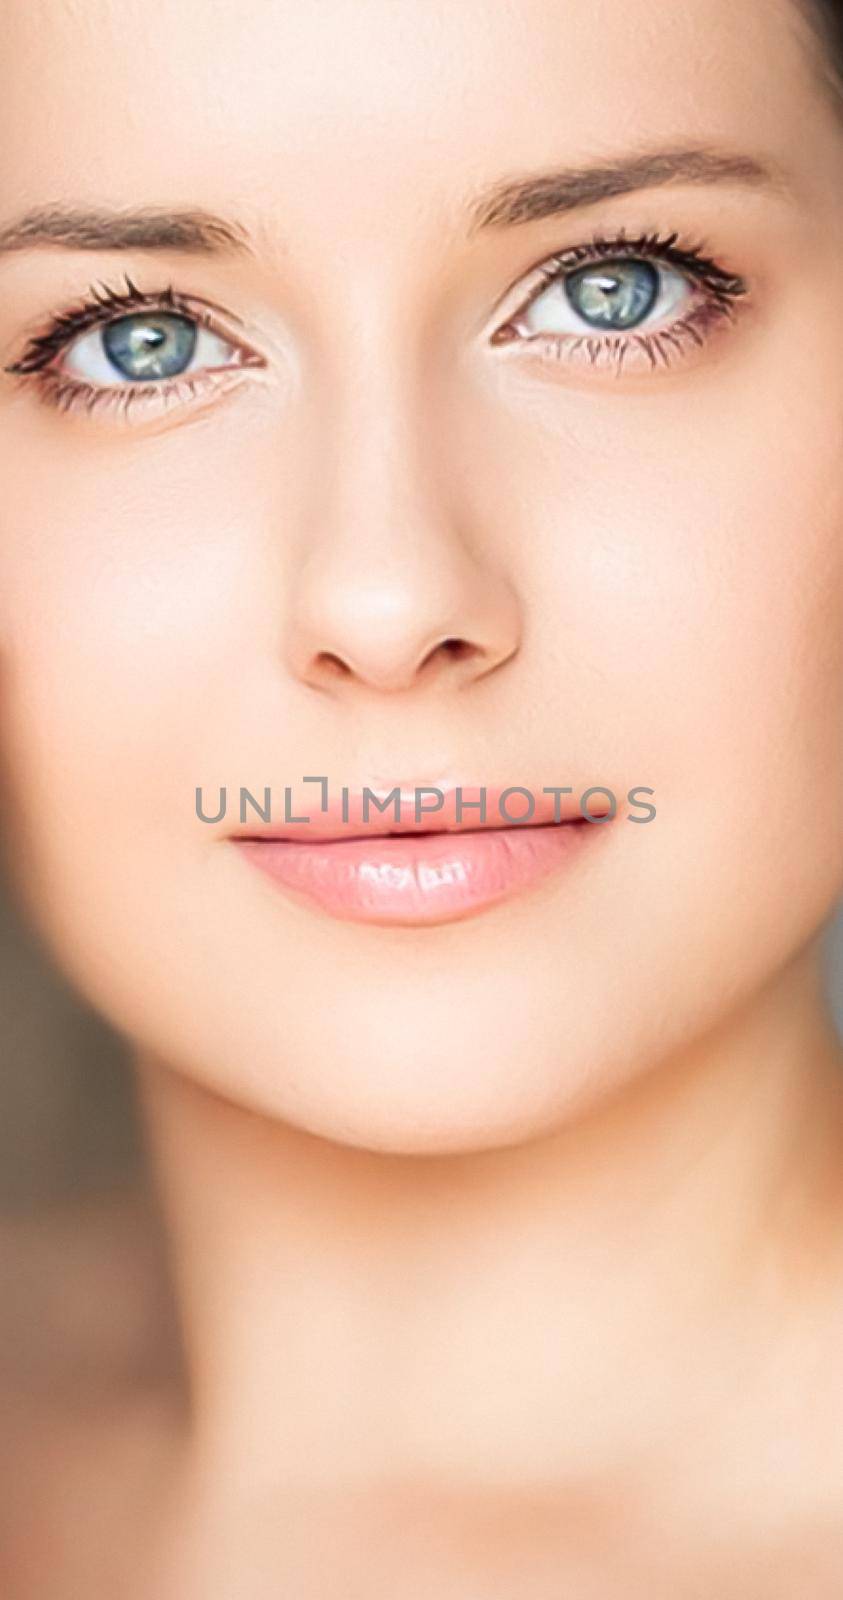 Perfect skin and beauty look, beautiful face of young woman for skincare cosmetics and cosmetology, close-up portrait